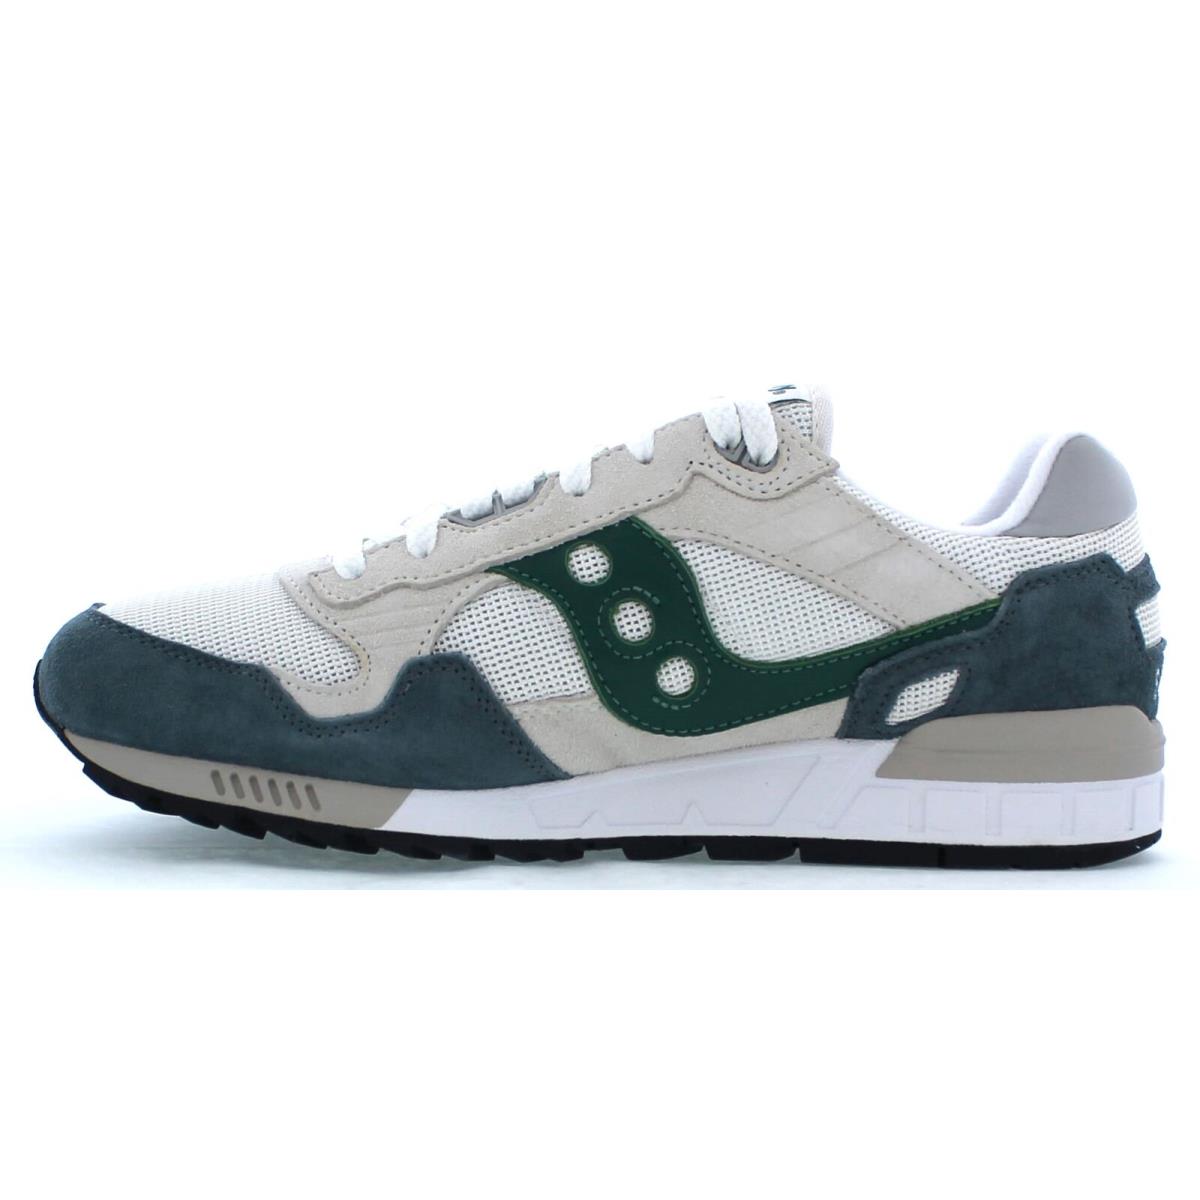 Saucony Shadow 5000 S70665-18 White/gray/green Size 9.5